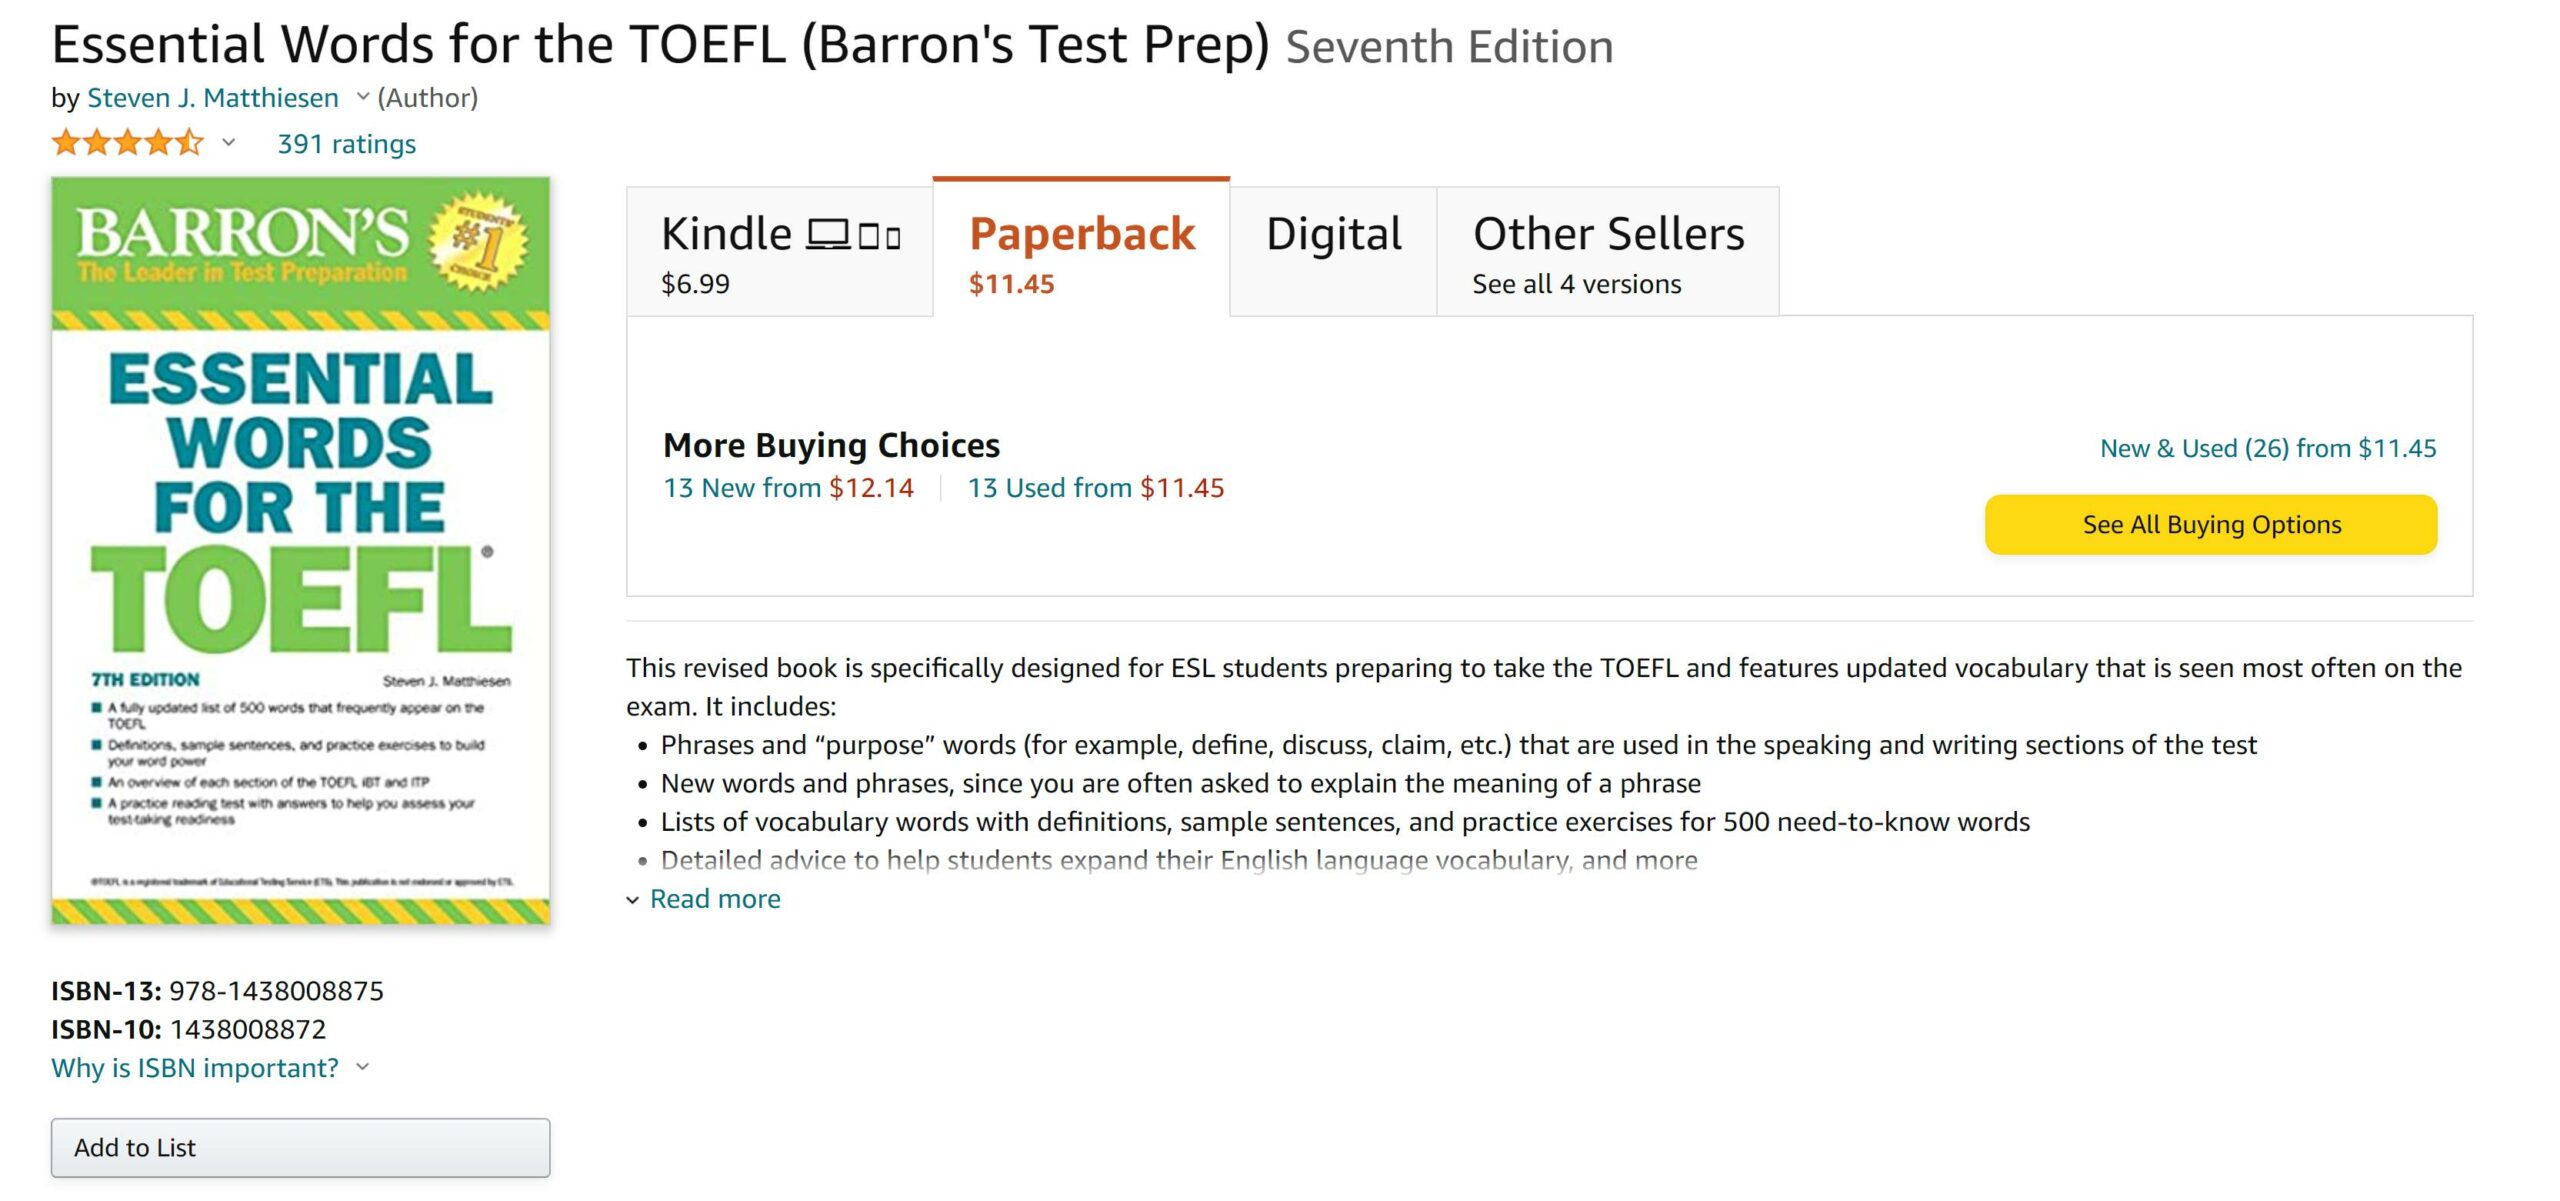 Barron's Essential Words for the TOEFL Book or Guide